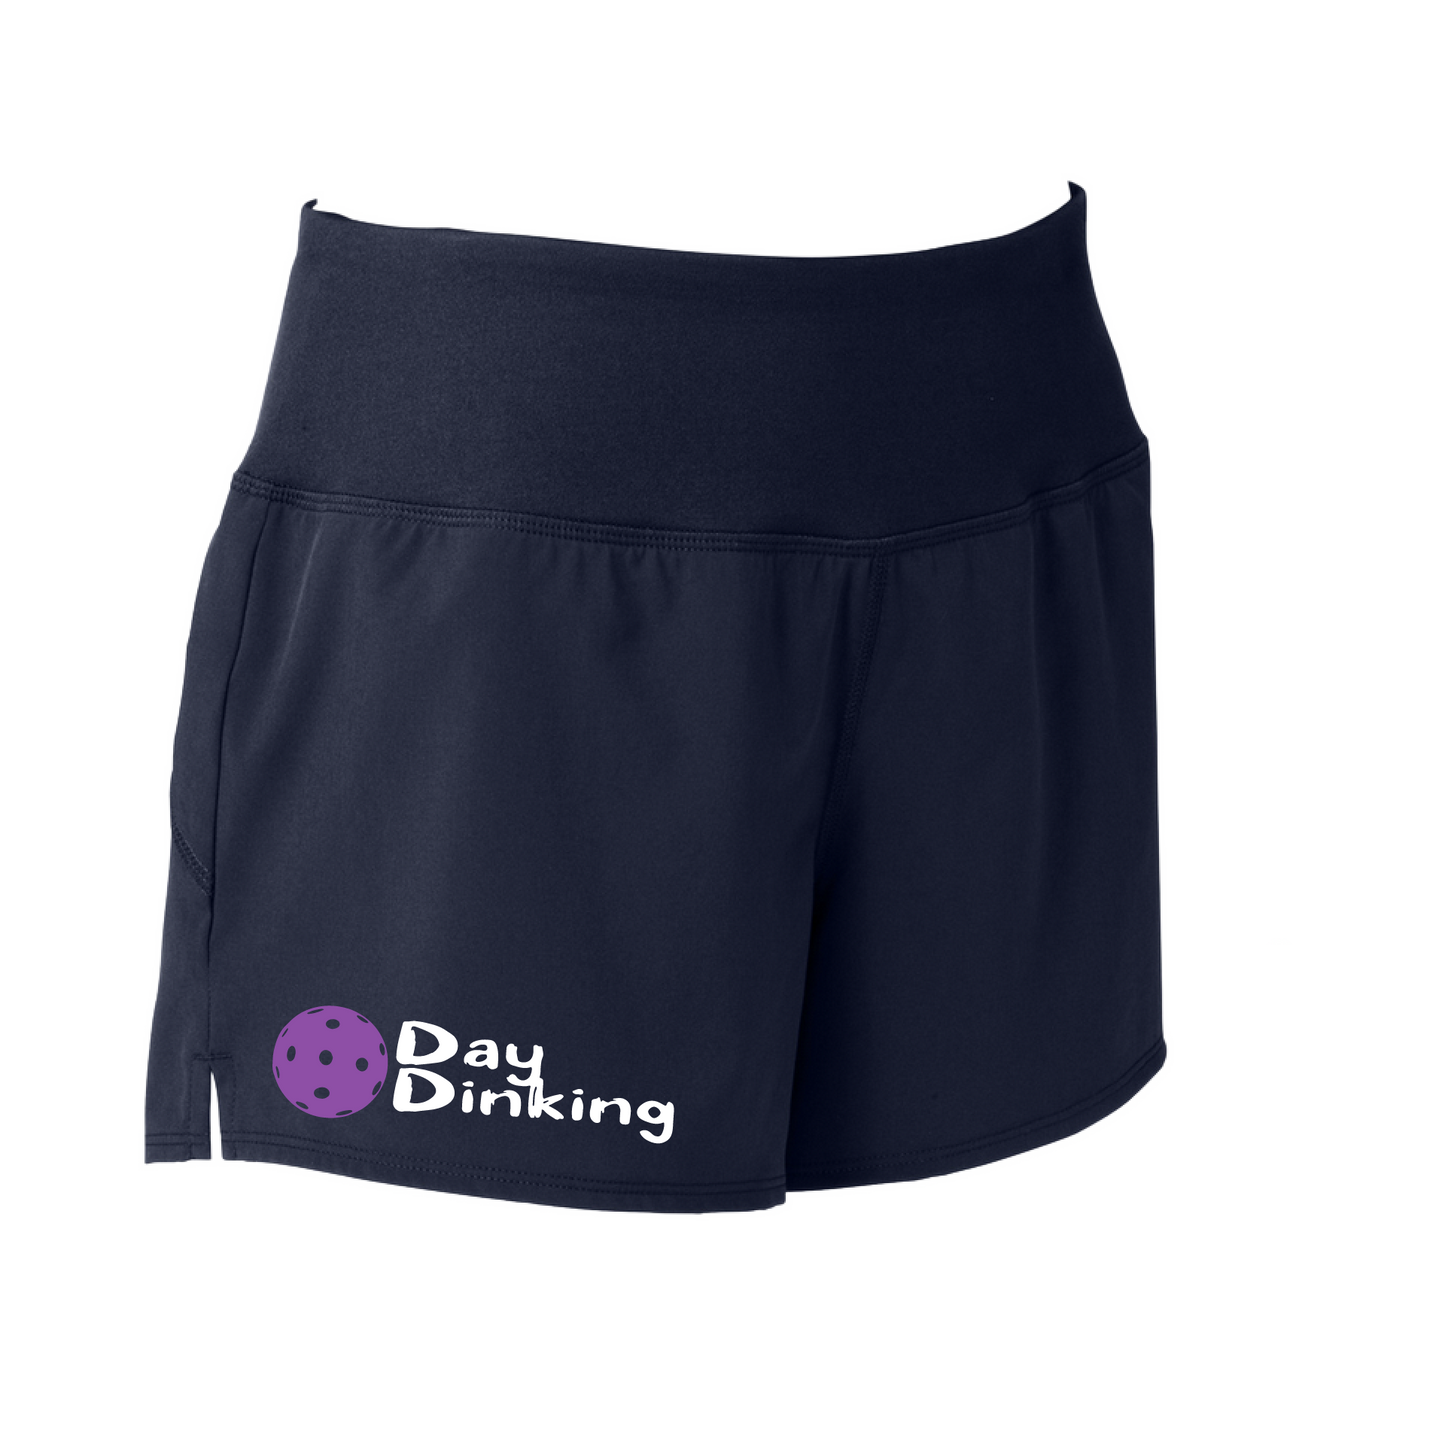 Shorts Designs: Day Dinking with Customizable Pickleball Color (Purple, Rainbow, White, & Yellow).  Sport Tek women’s repeat shorts come with built-in cell phone pocket on the exterior of the waistband. You can also feel secure knowing that no matter how strenuous the exercise, the shorts will remain in place (it won’t ride up!). These shorts are extremely versatile and trendy. Transition from the Pickleball court to running errands smoothly.